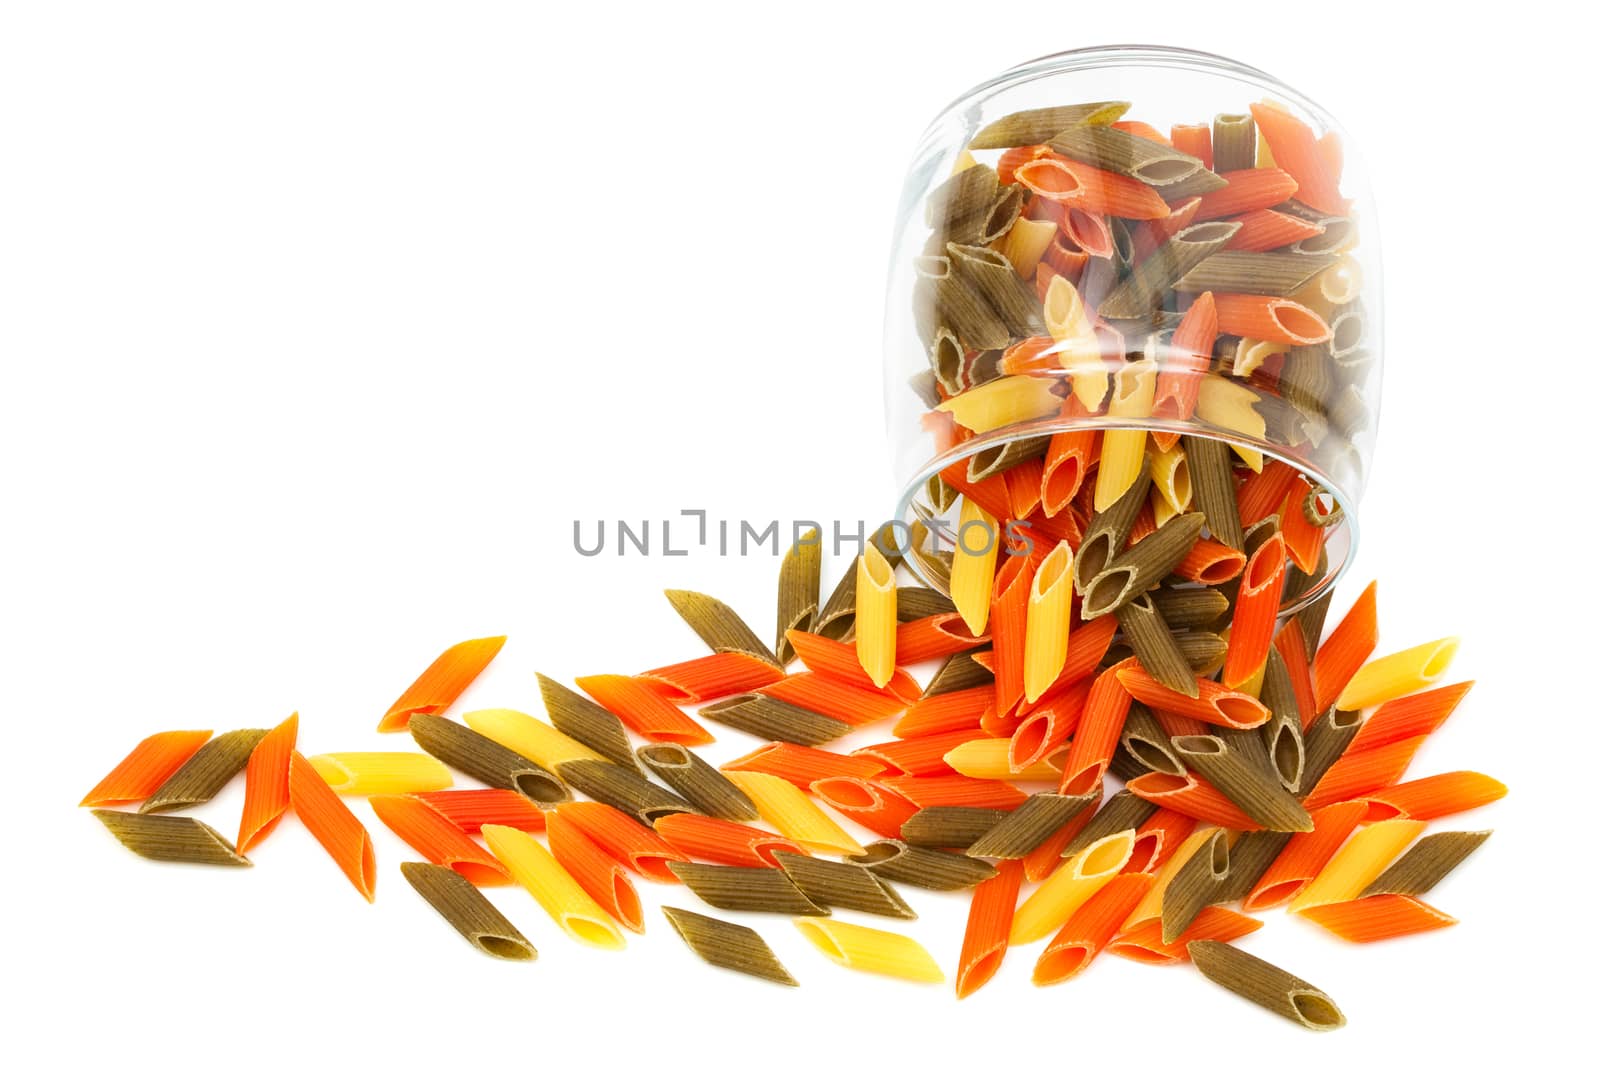 pasta in glass jar by terex